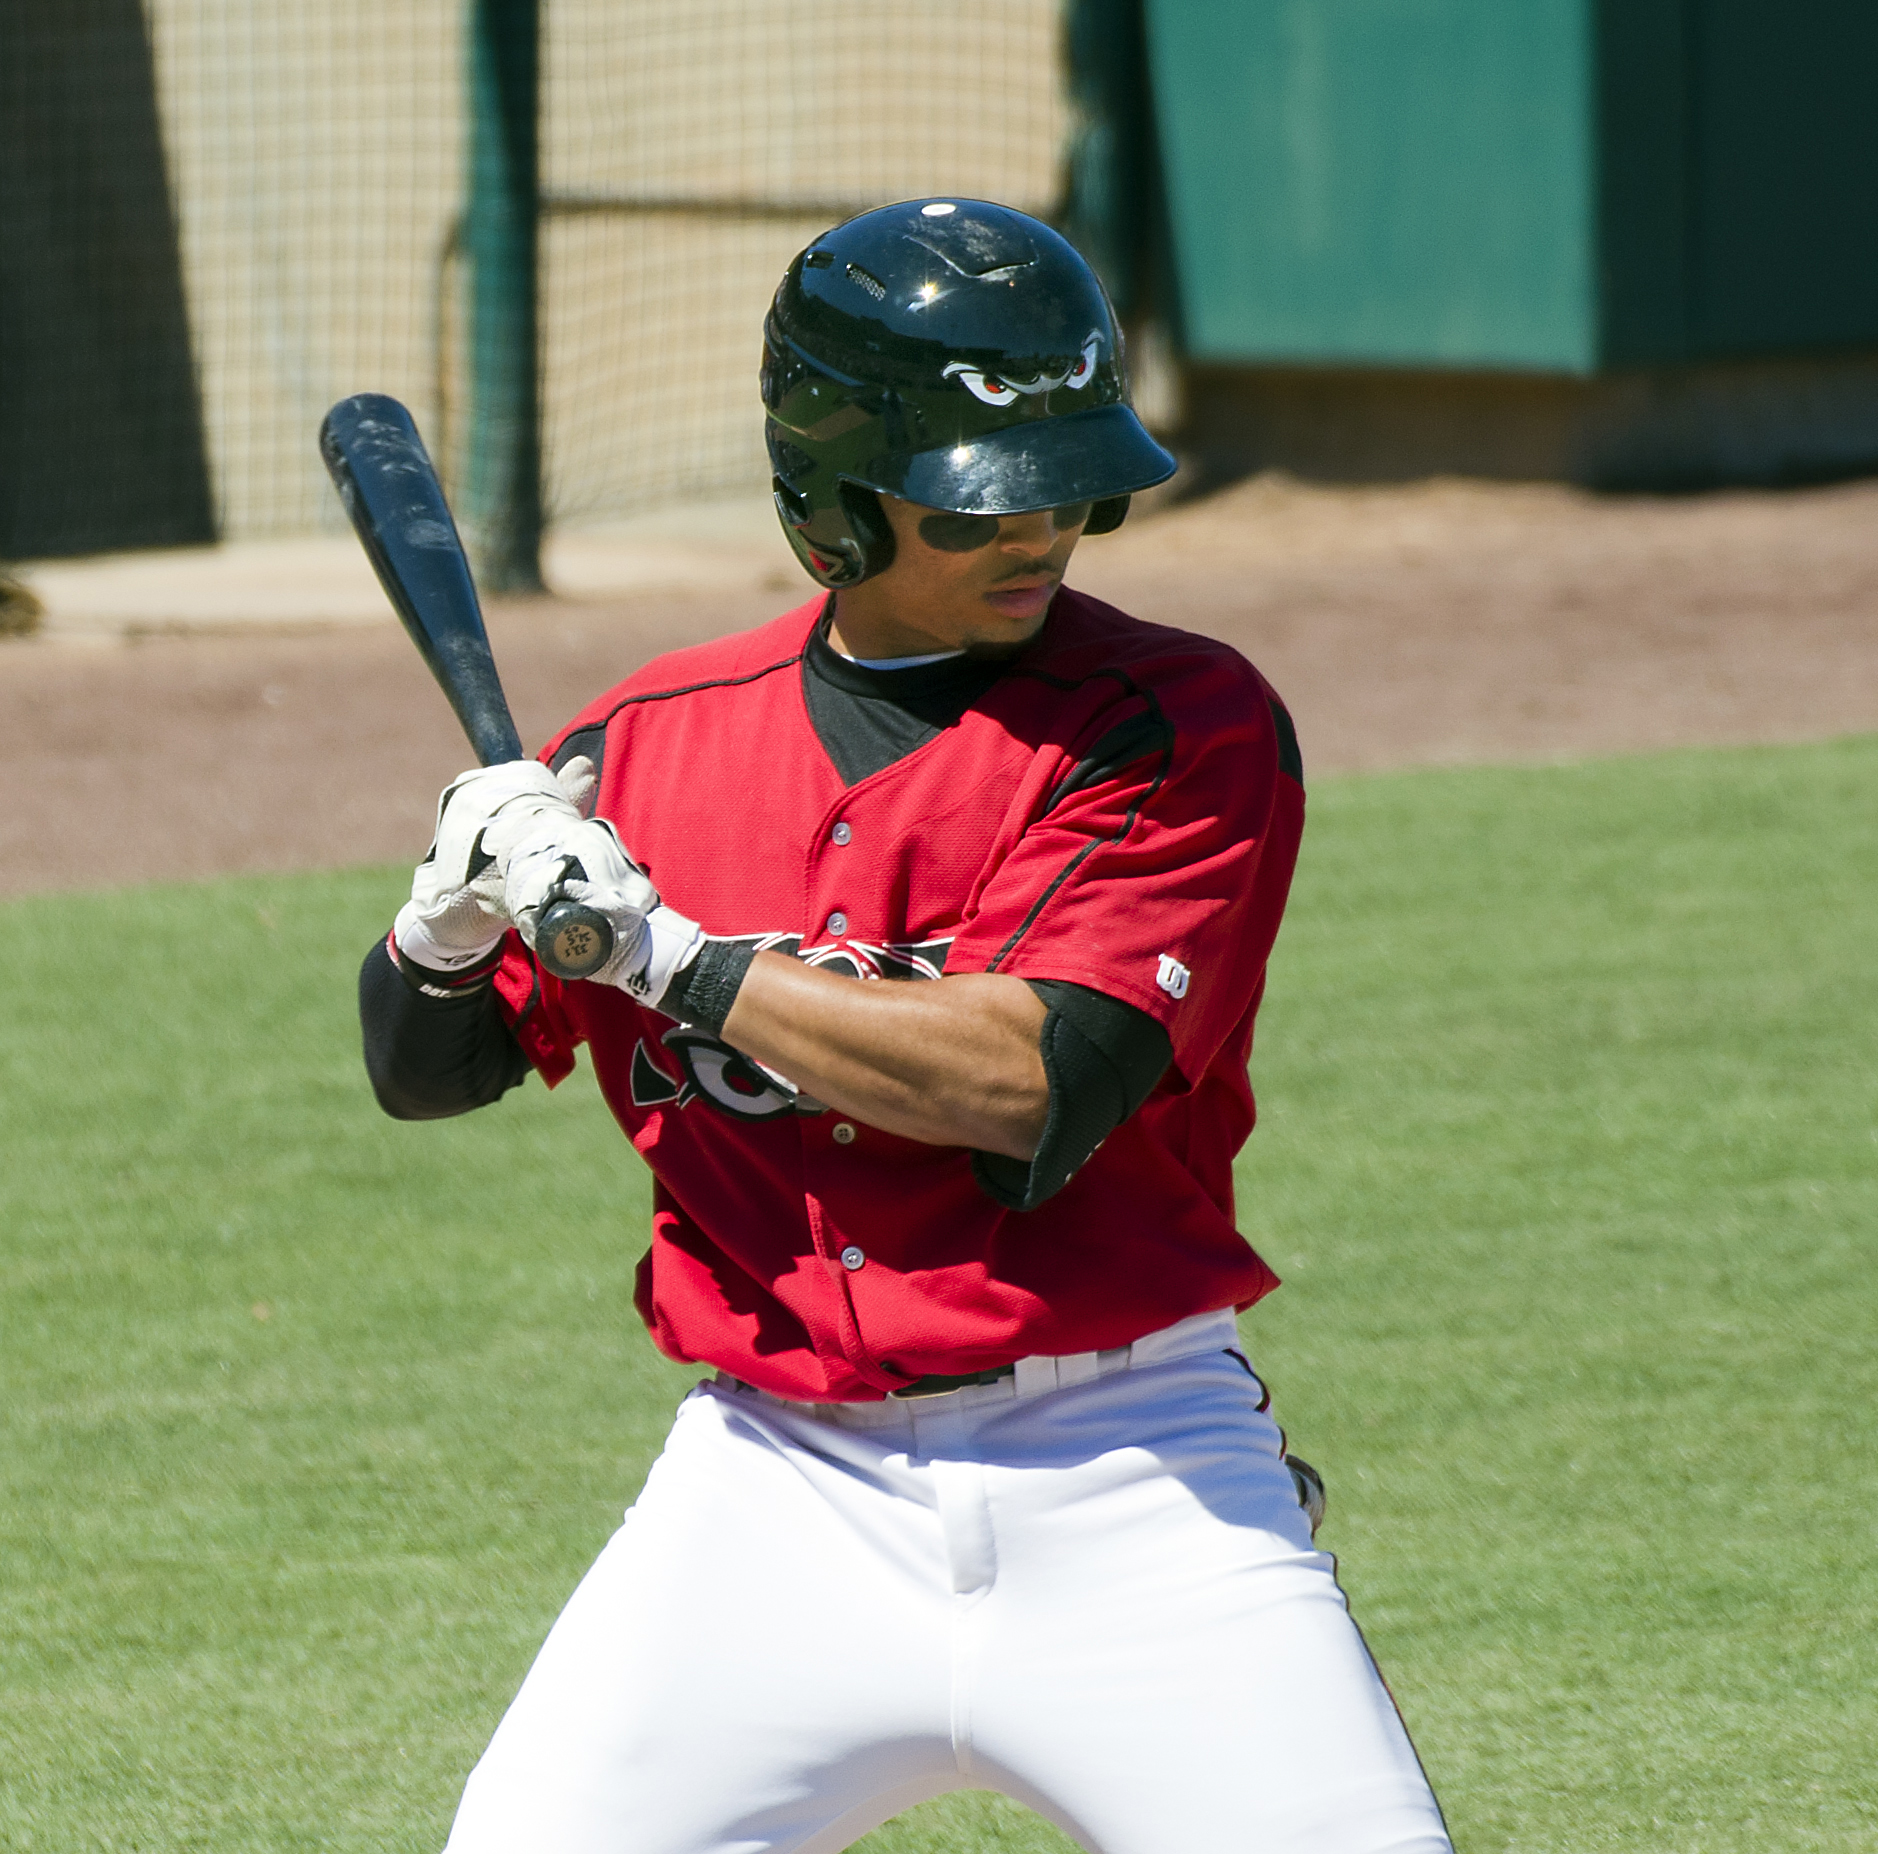 a man is in a baseball uniform ready to play